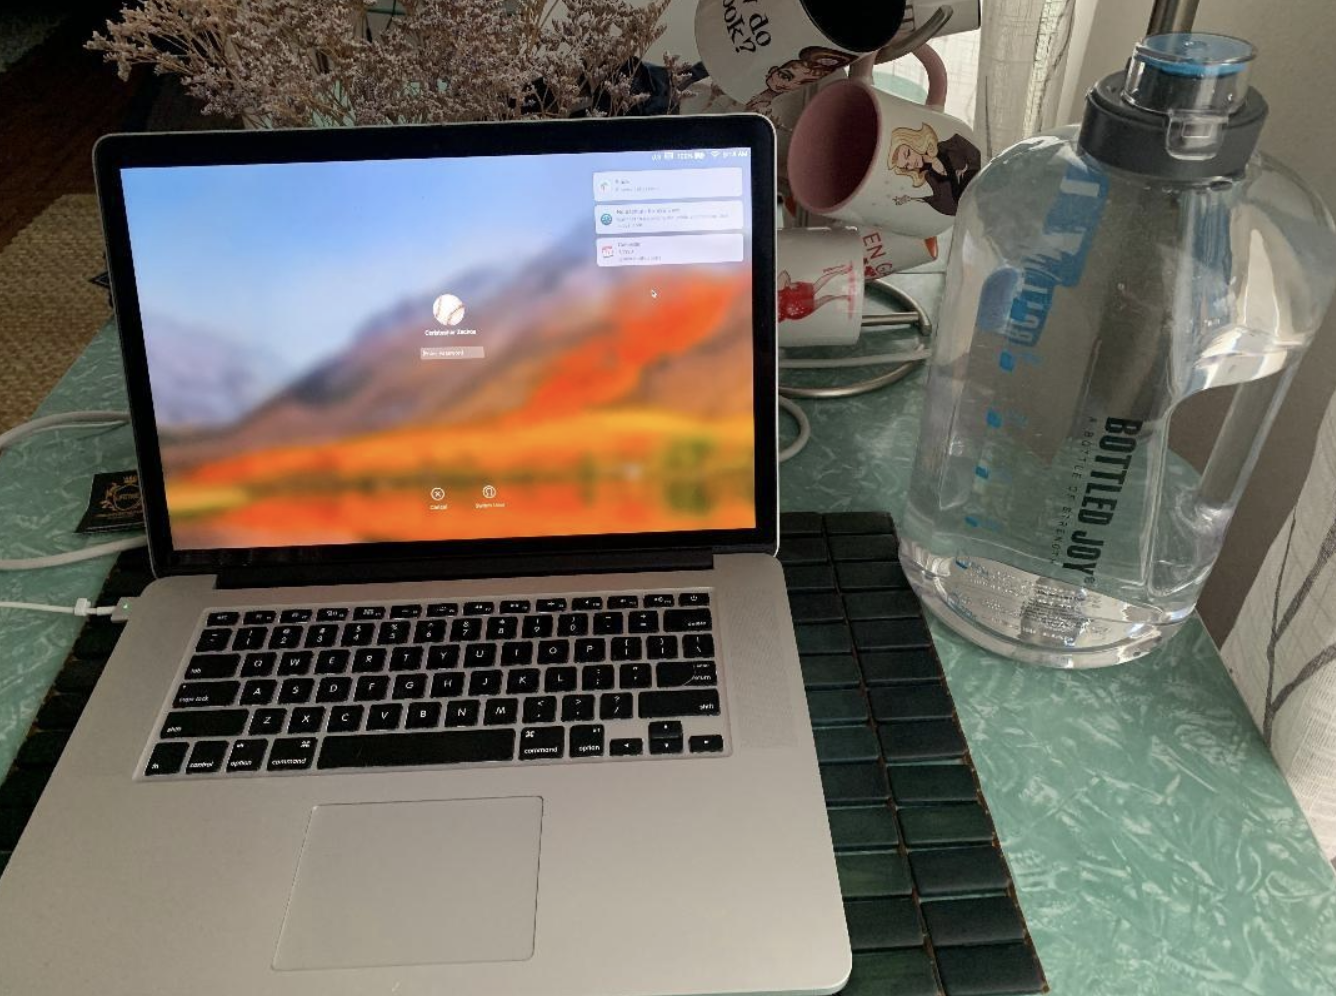 A reviewer&#x27;s water bottle next to their laptop